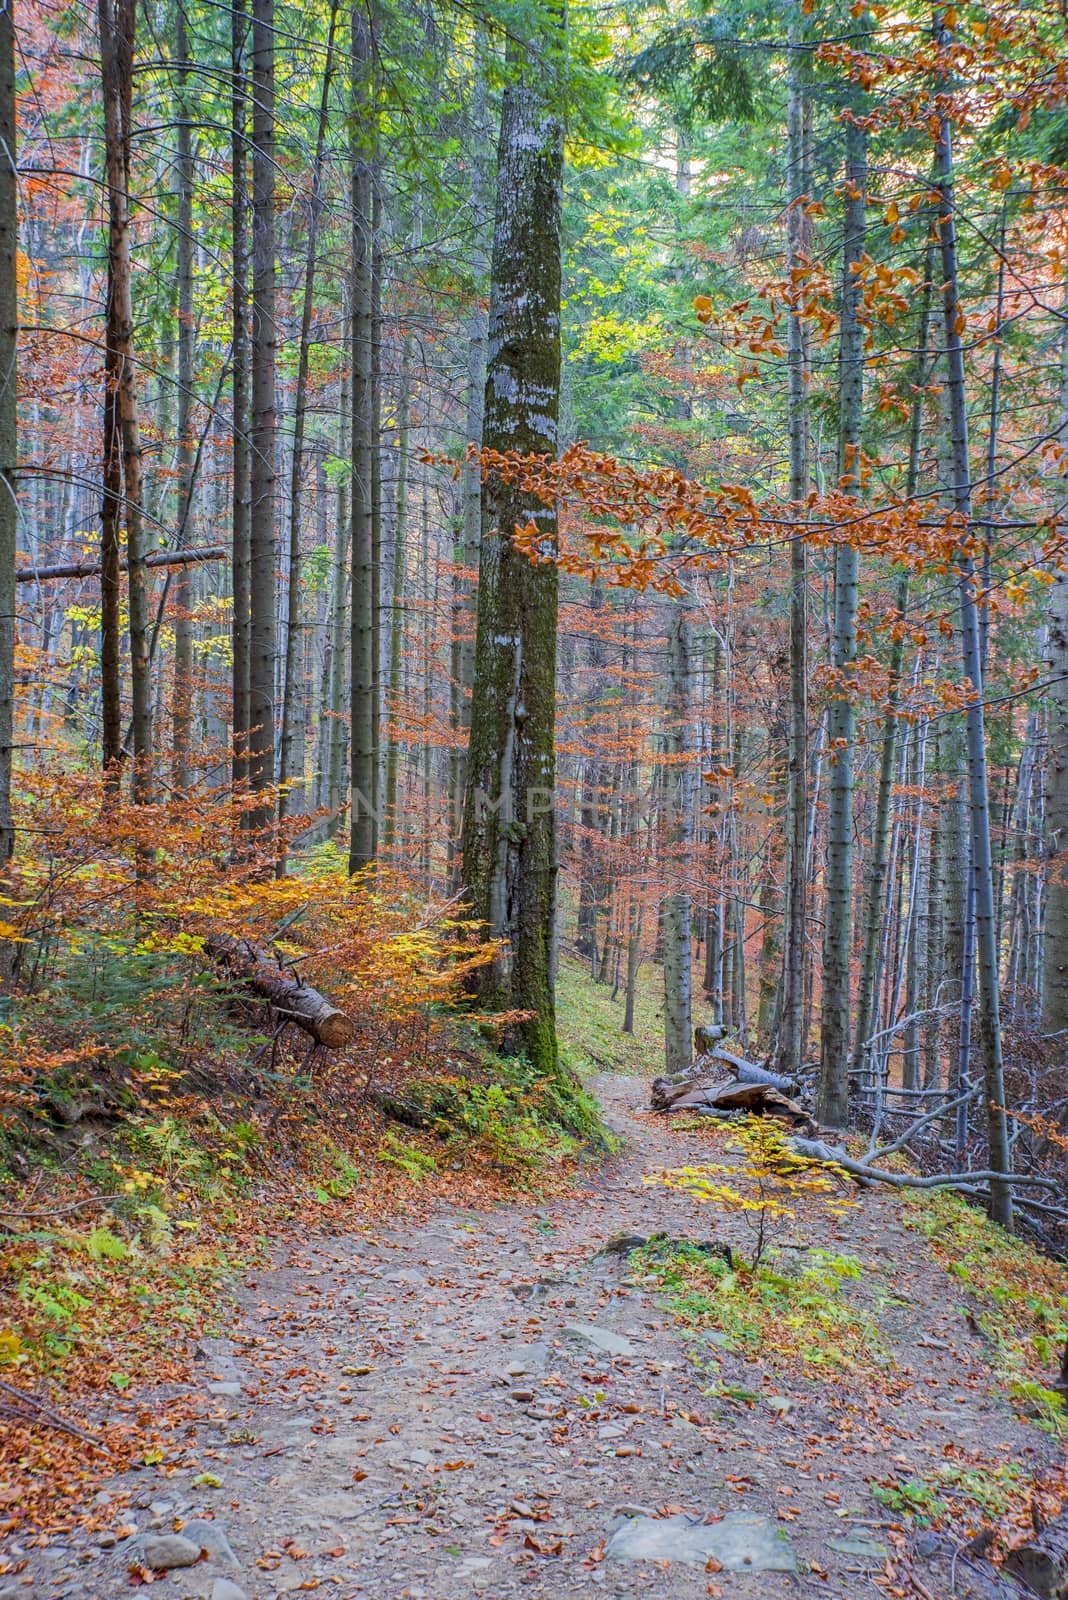 Mountain foot path in autumn forest by savcoco